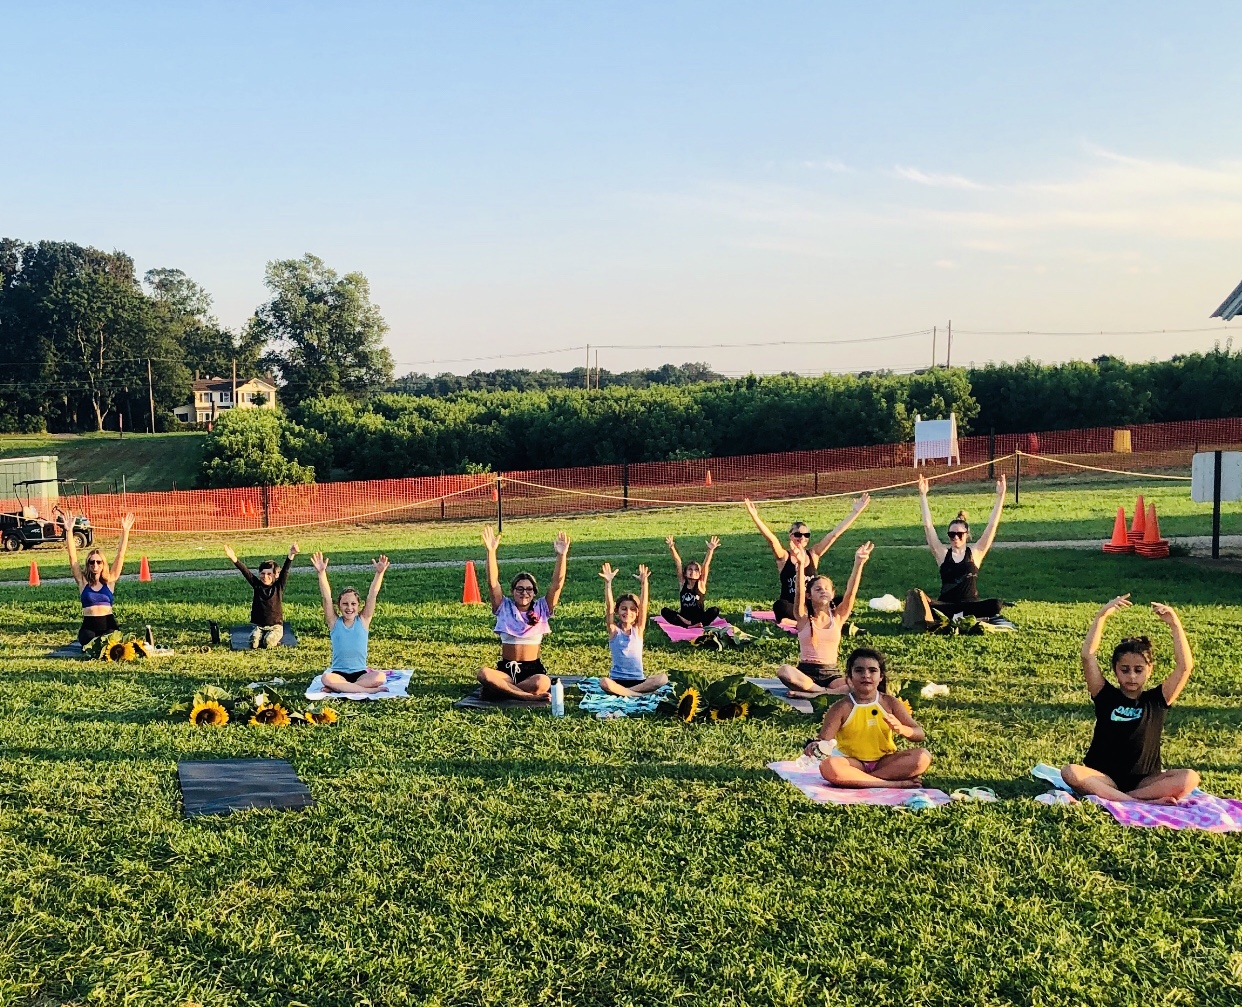 Dragonfly Aerial Yoga Studio 411 NJ-34, Colts Neck New Jersey 07722